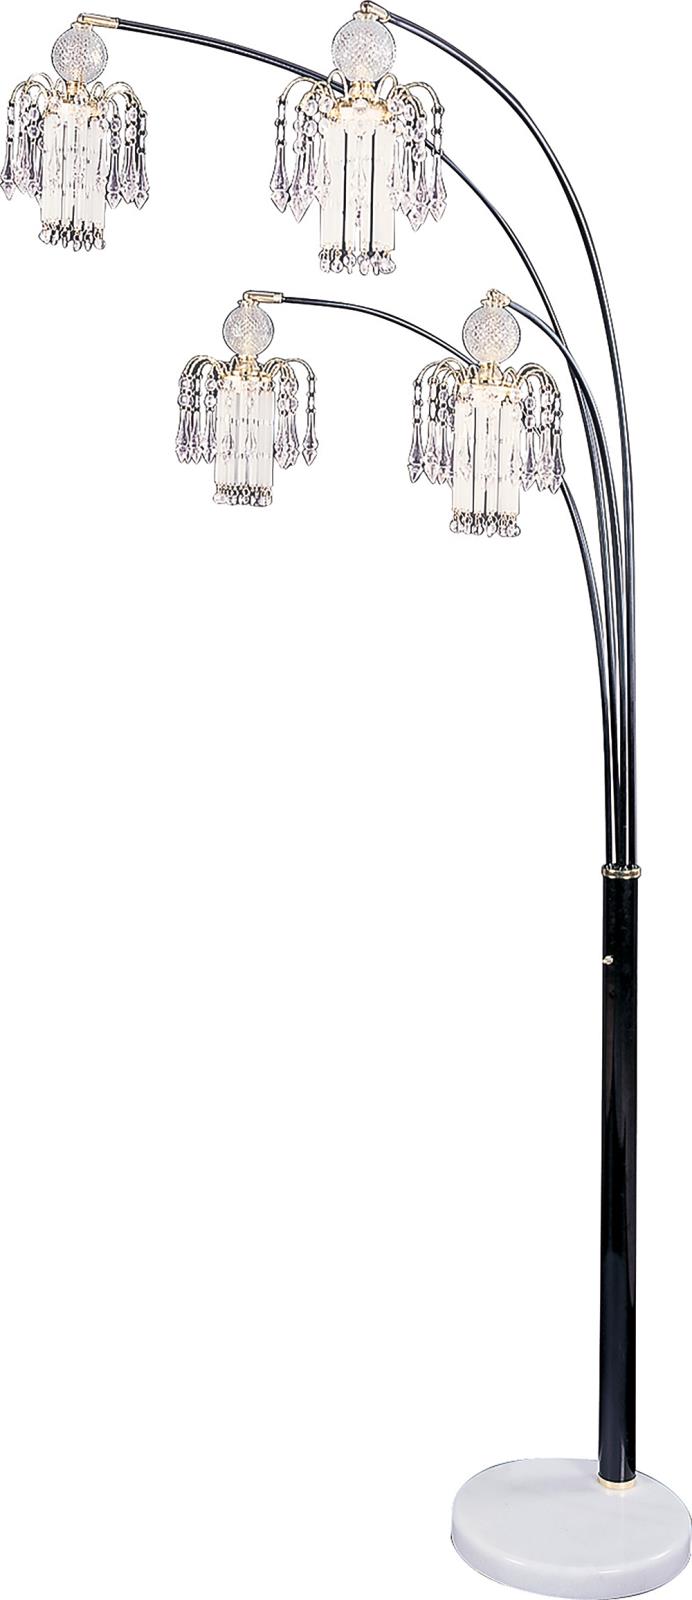 Maisel Floor Lamp with 4 Staggered Shades Black  Half Price Furniture